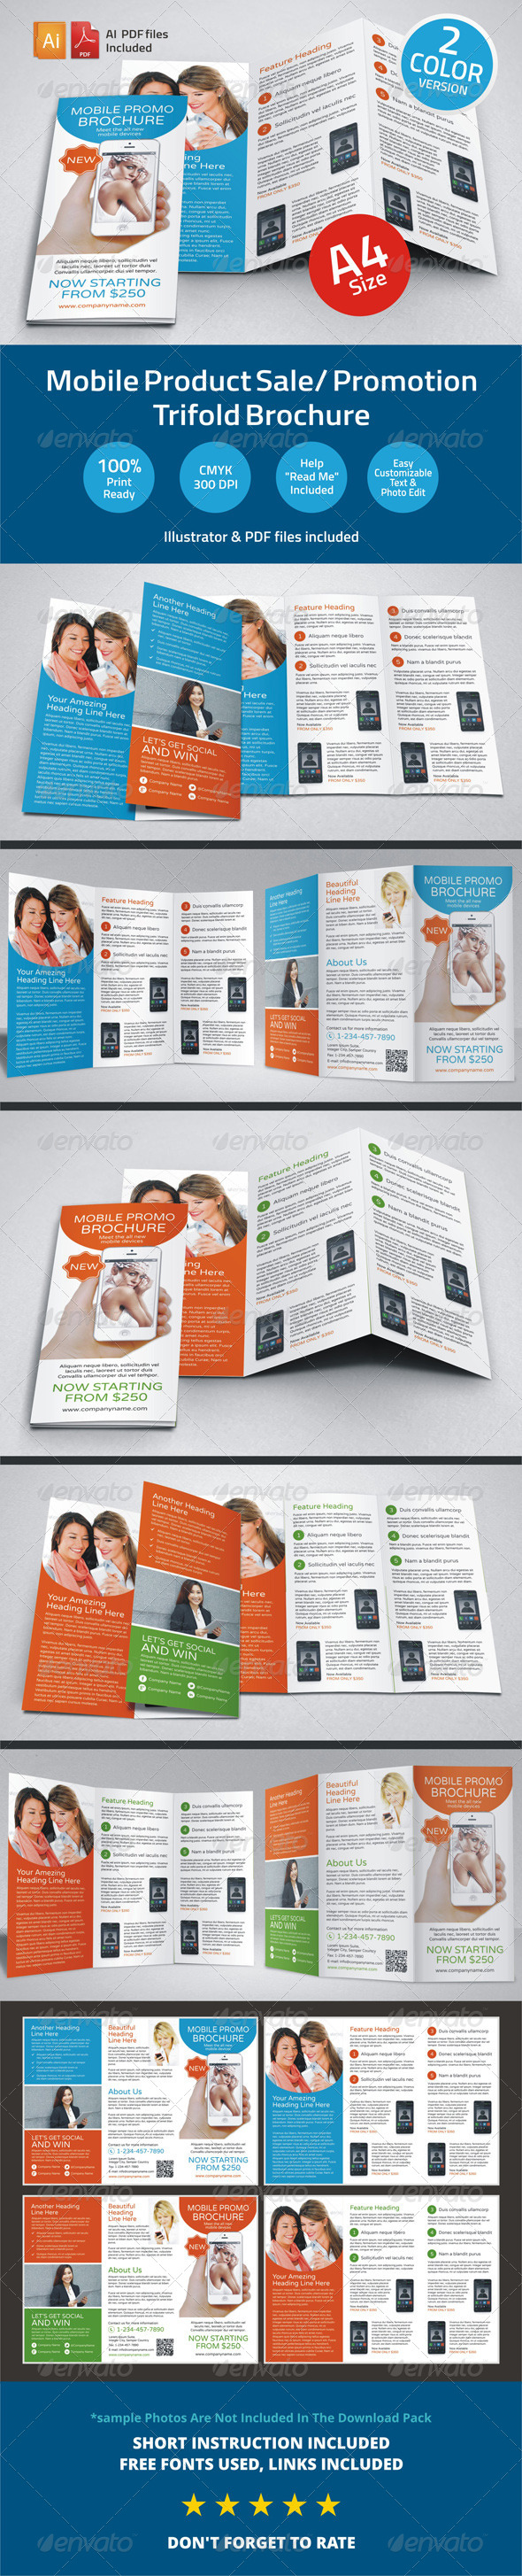 Mobile Product Sale Promotion Trifold Brochure By Jbn